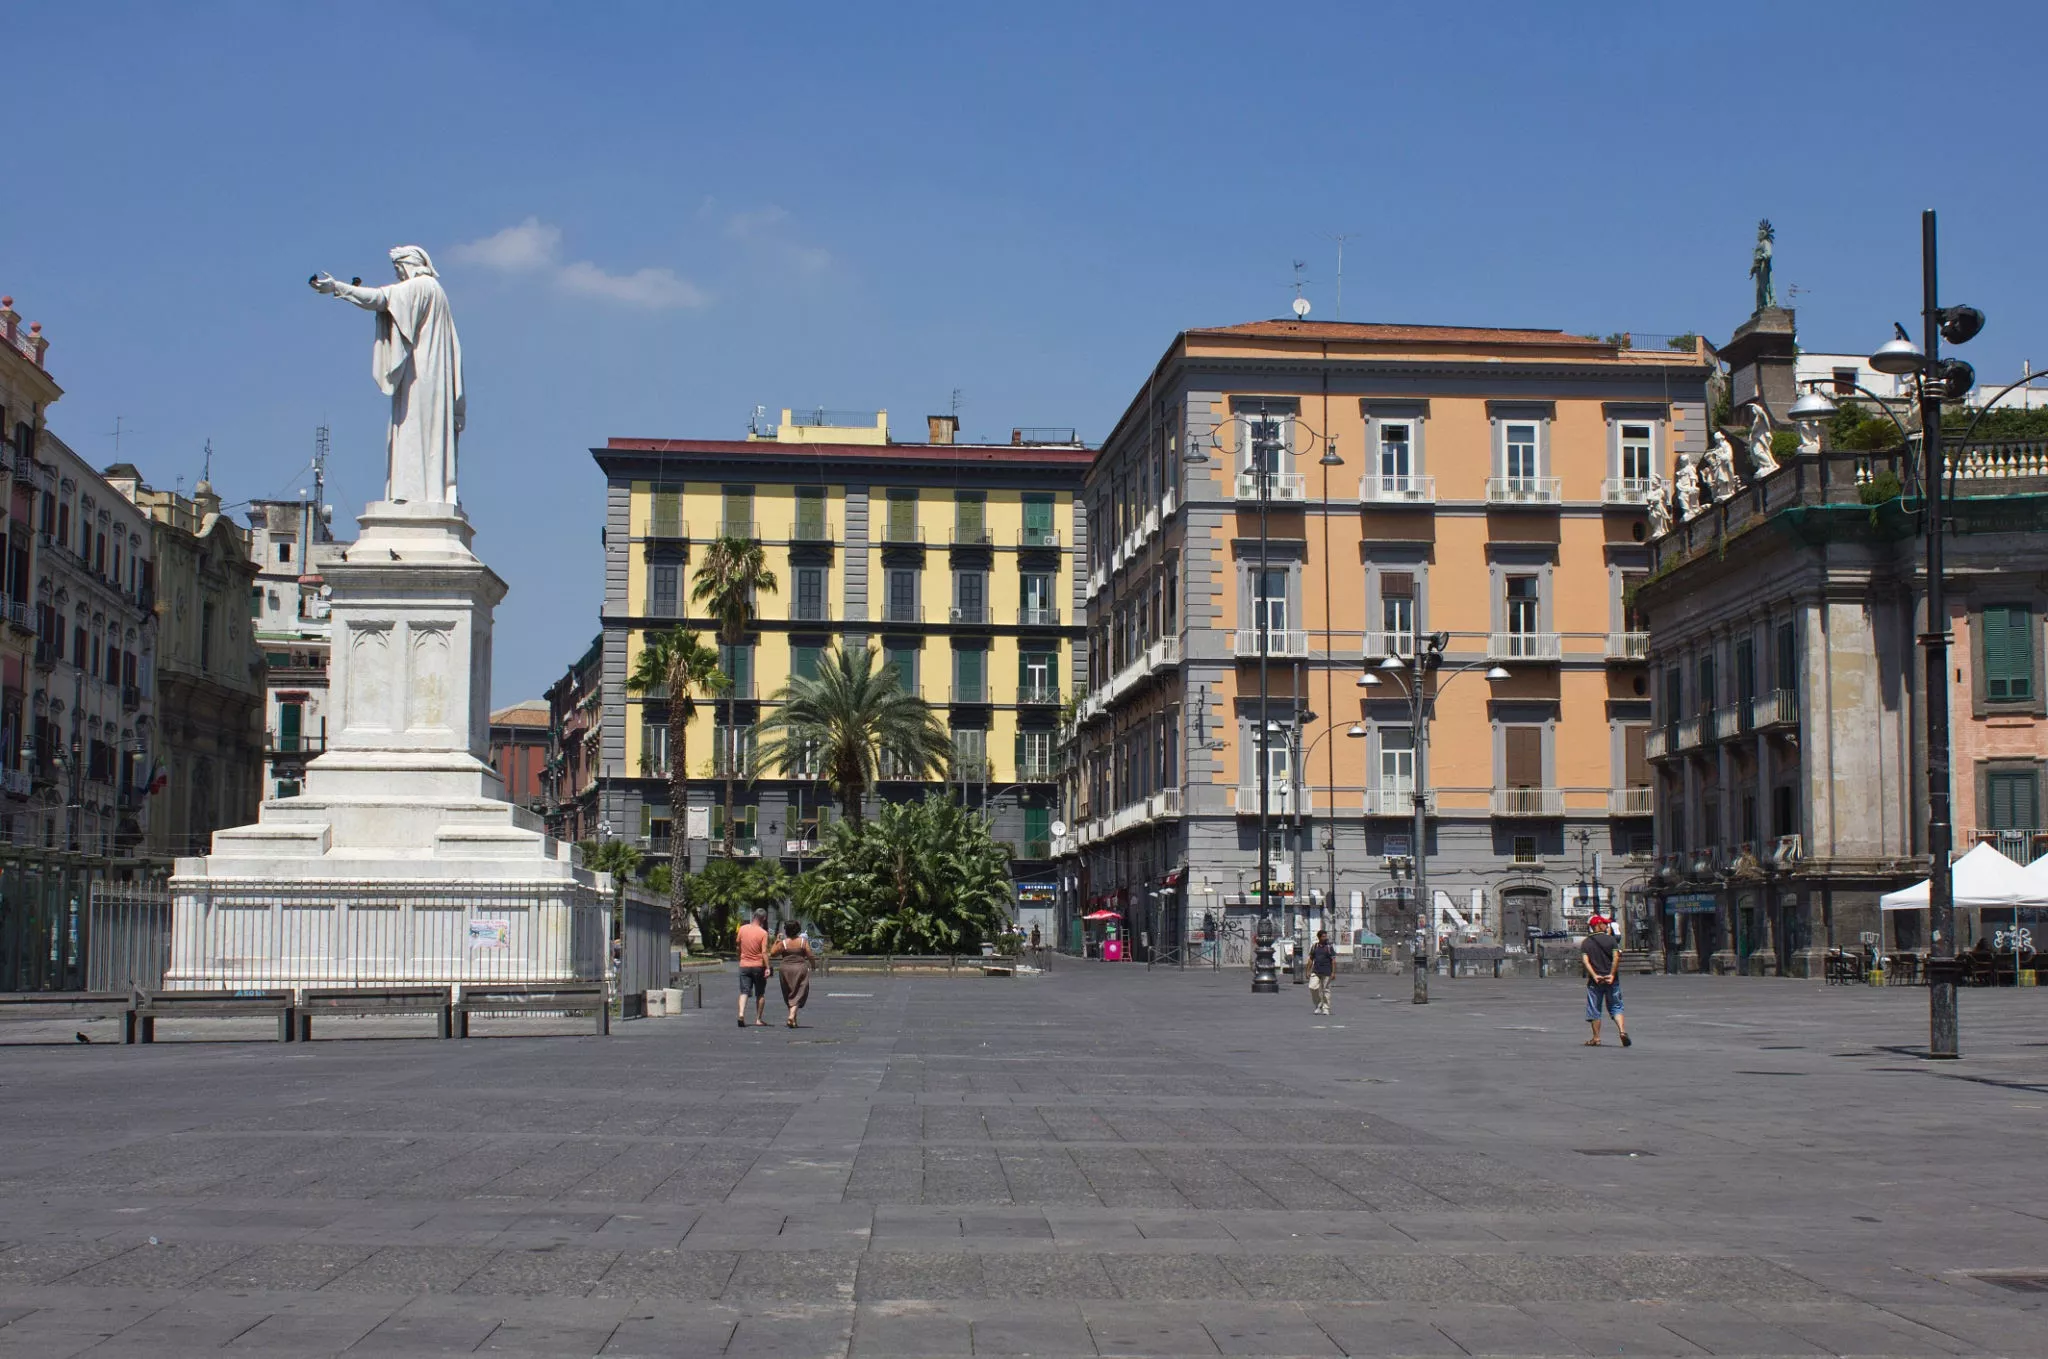 Dante Square in Italy, Europe | Architecture - Rated 3.5